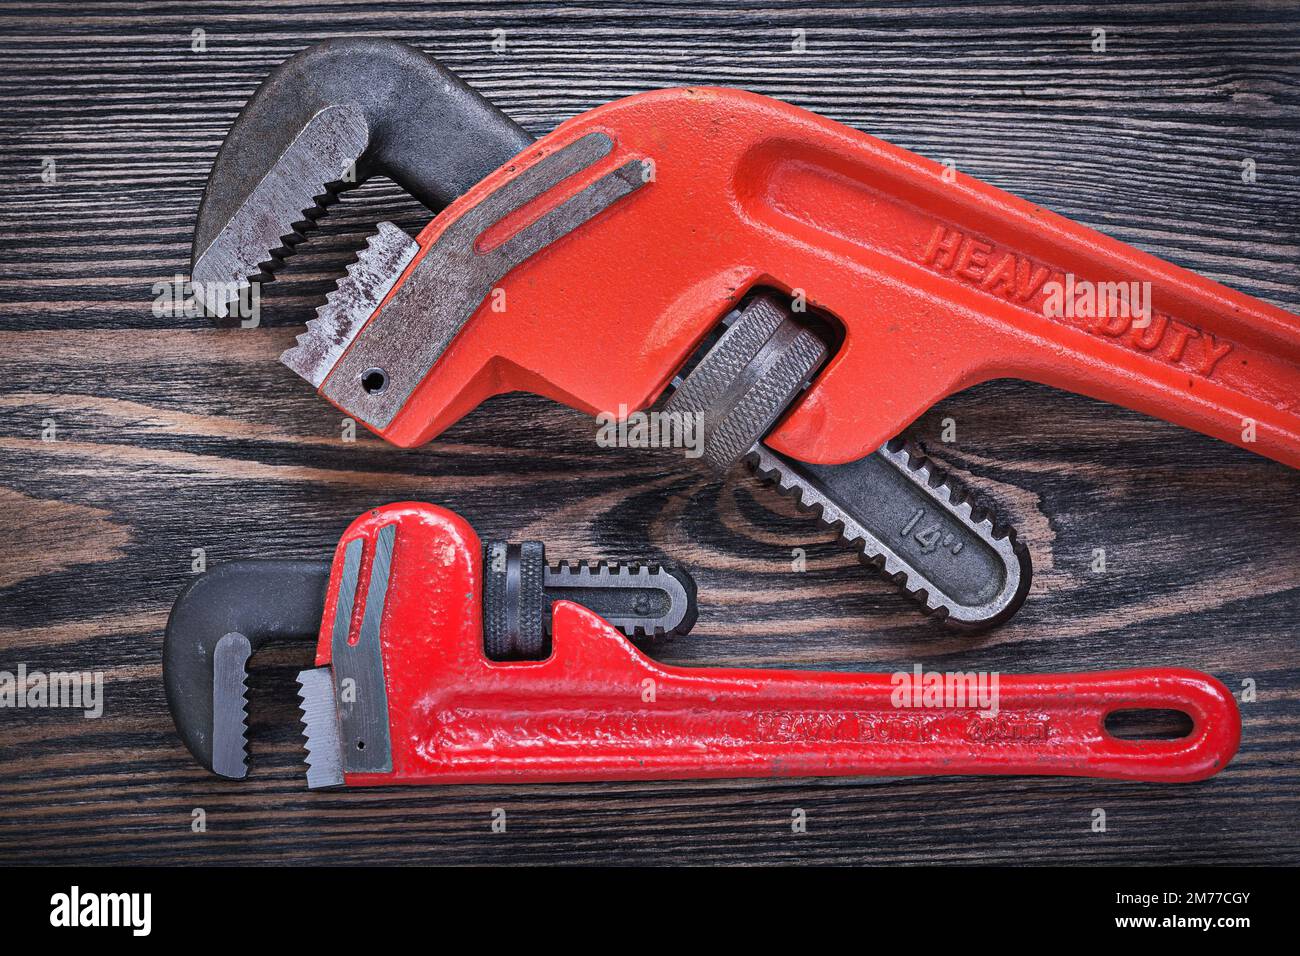 Pipe wrenches on wooden board horizontal view plumbing concept. Stock Photo